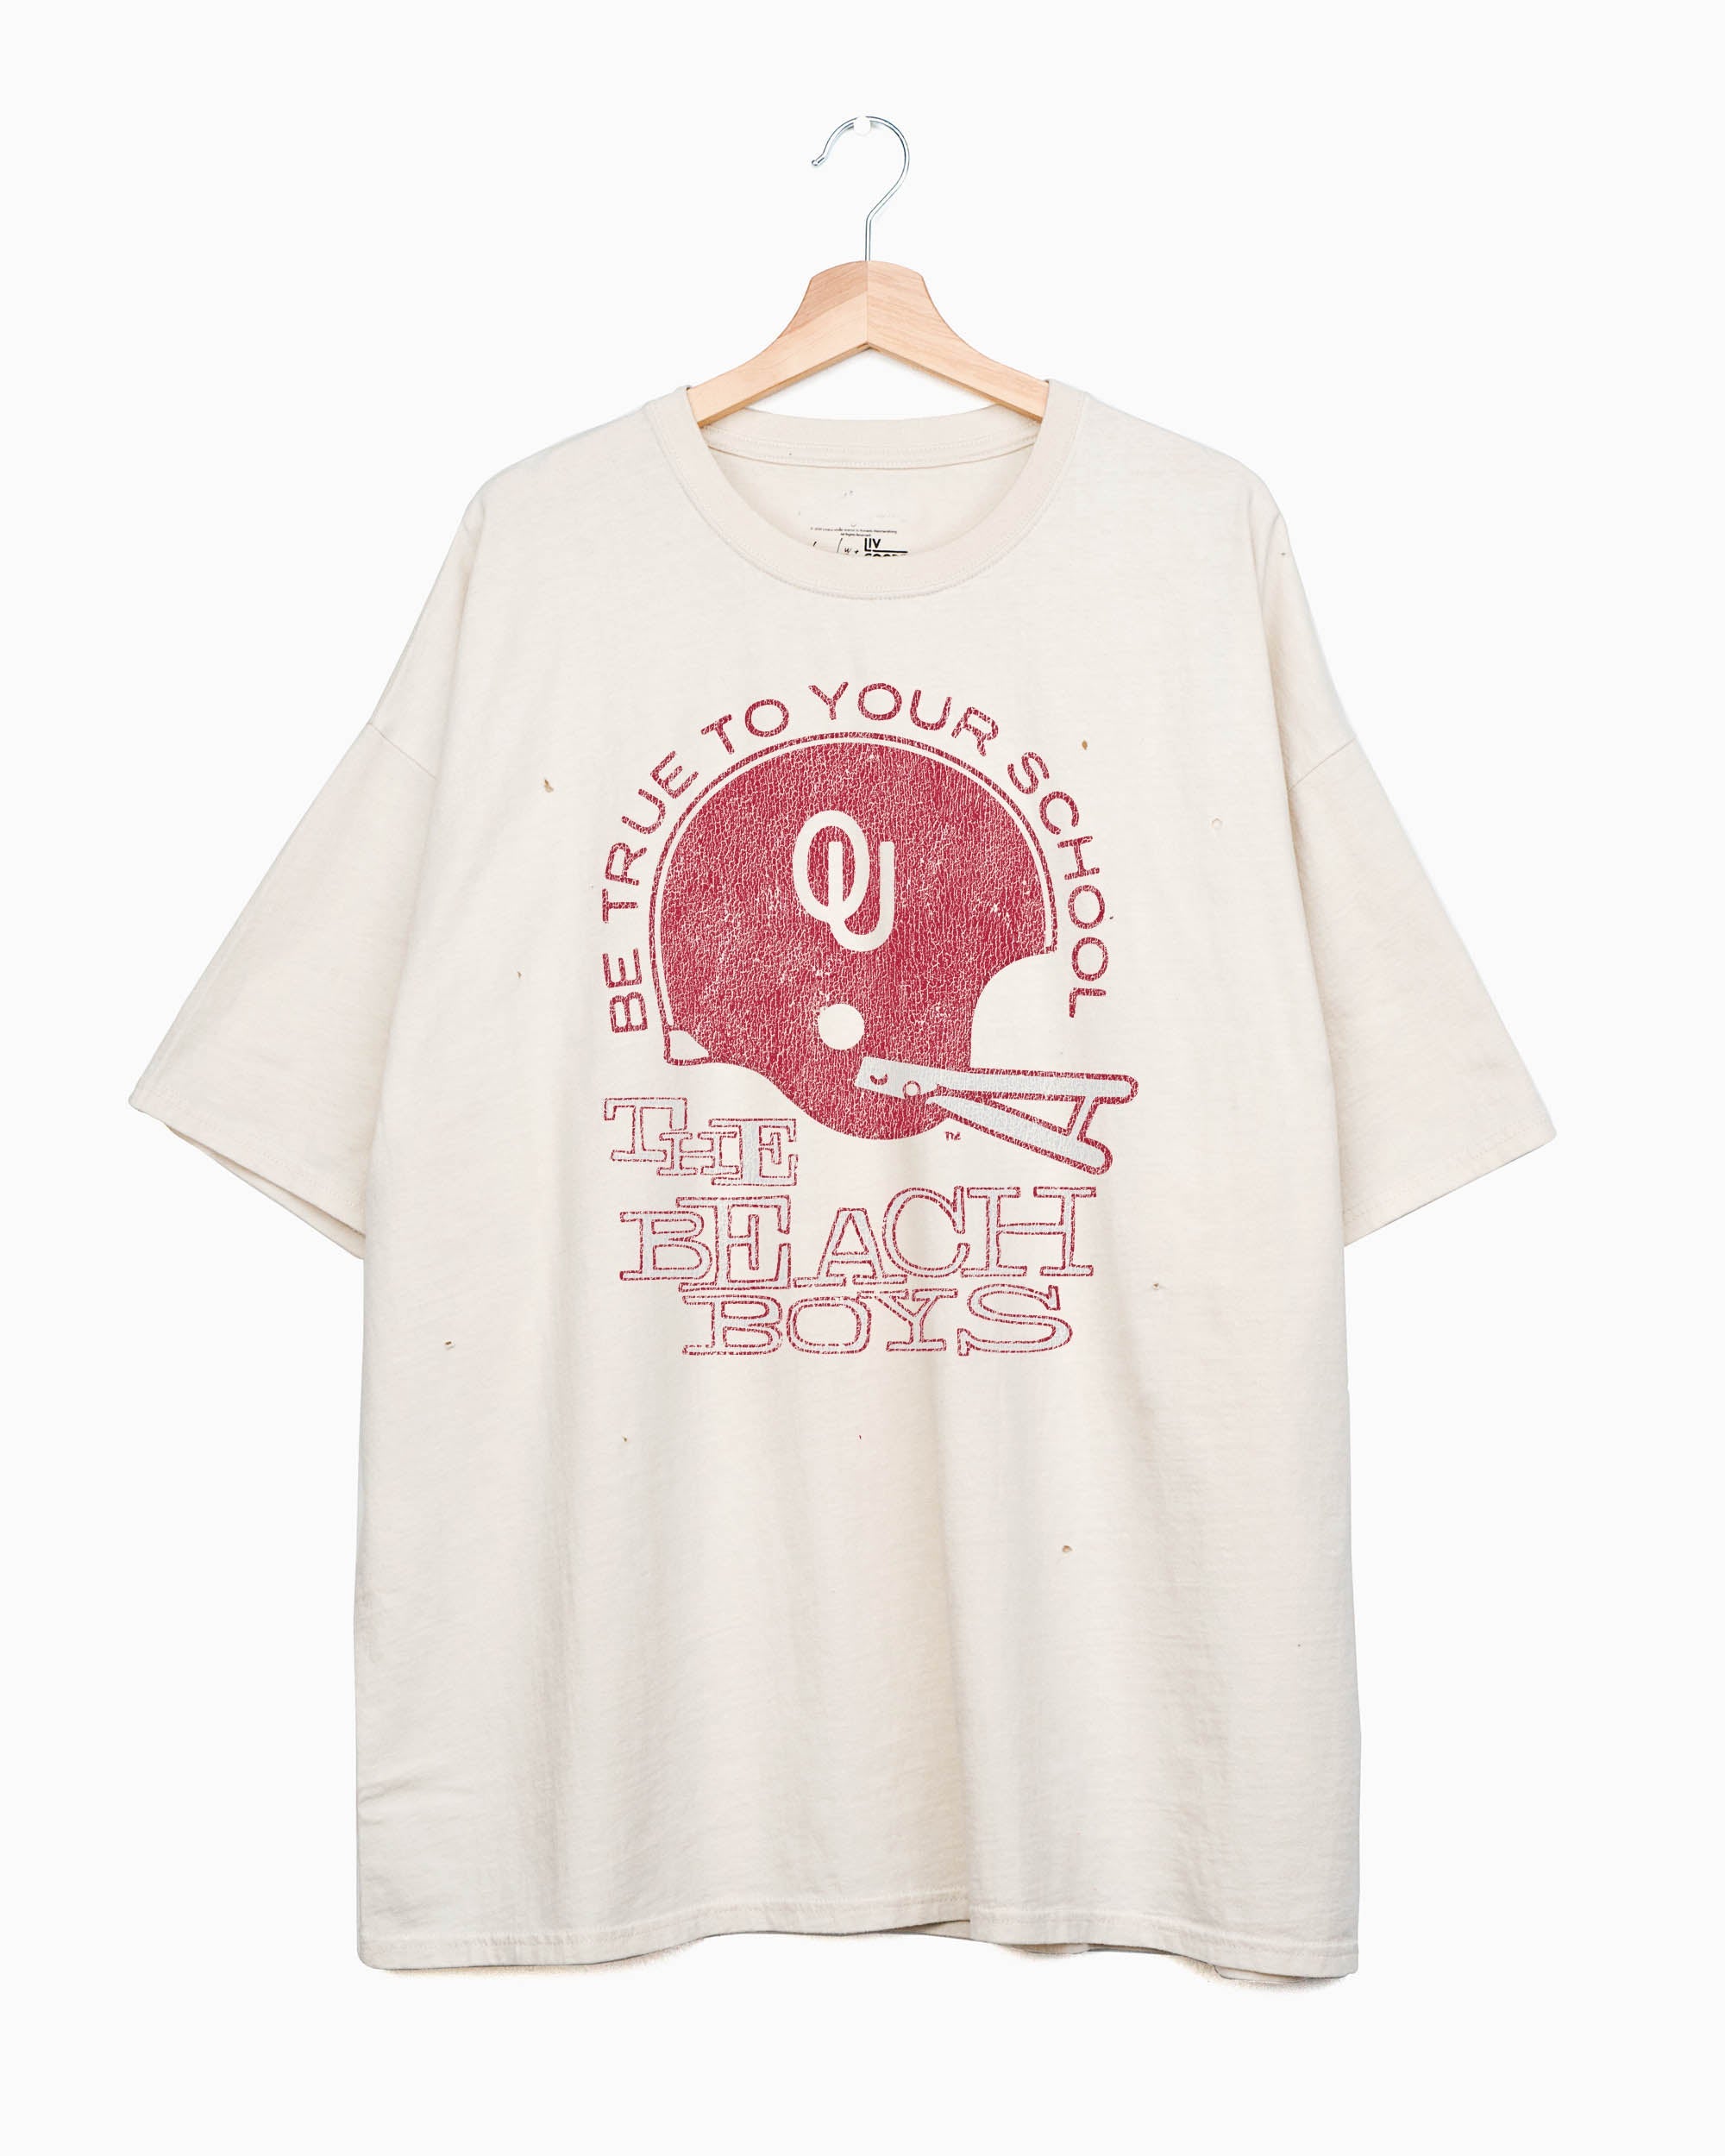 The Beach Boys OU Sooners True To Your School Off White Thrifted Tee - shoplivylu